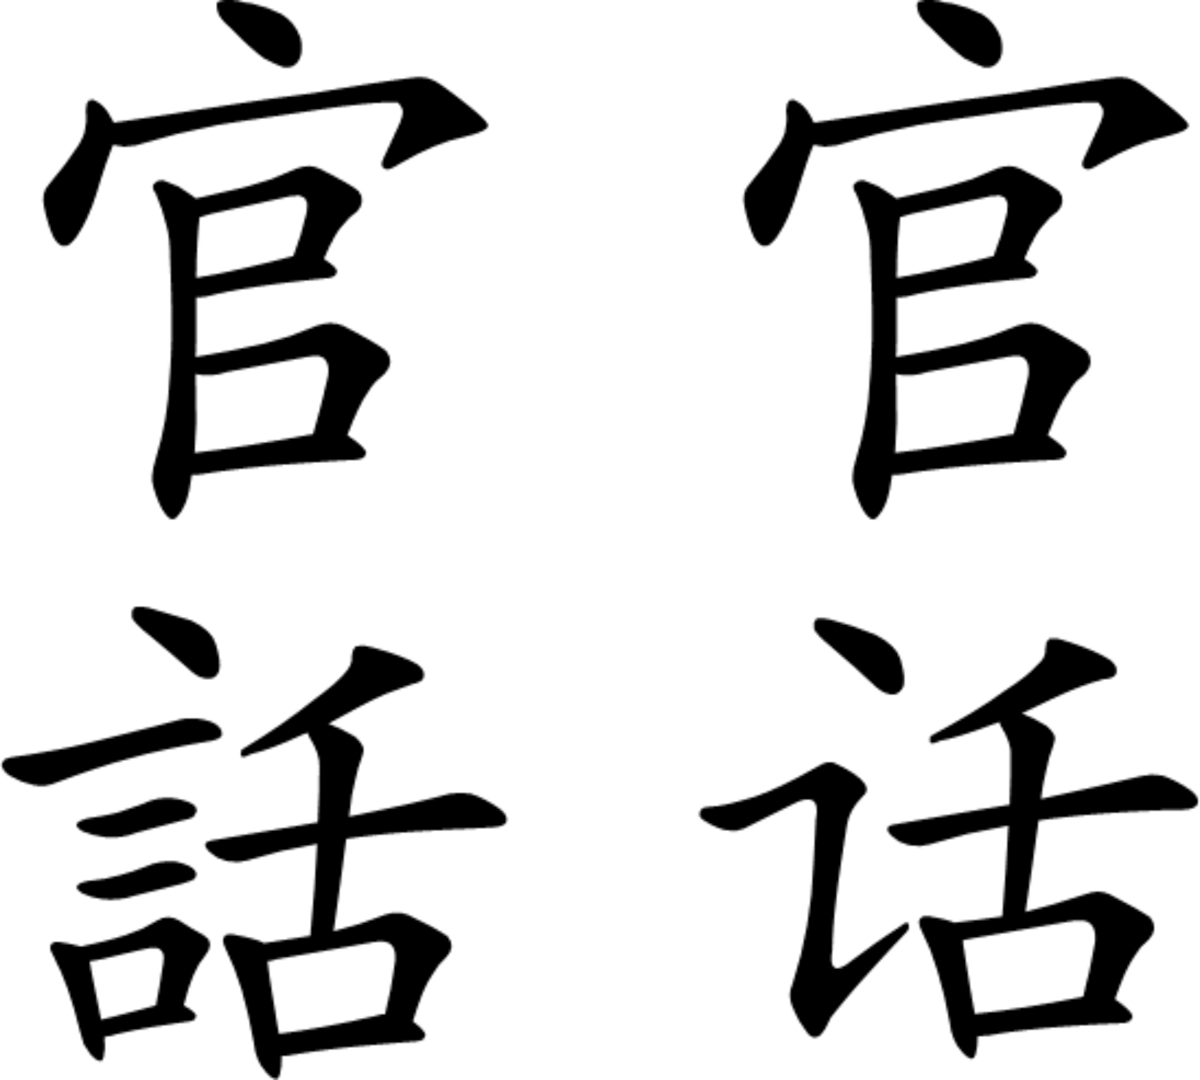 A brief history of the Chinese language